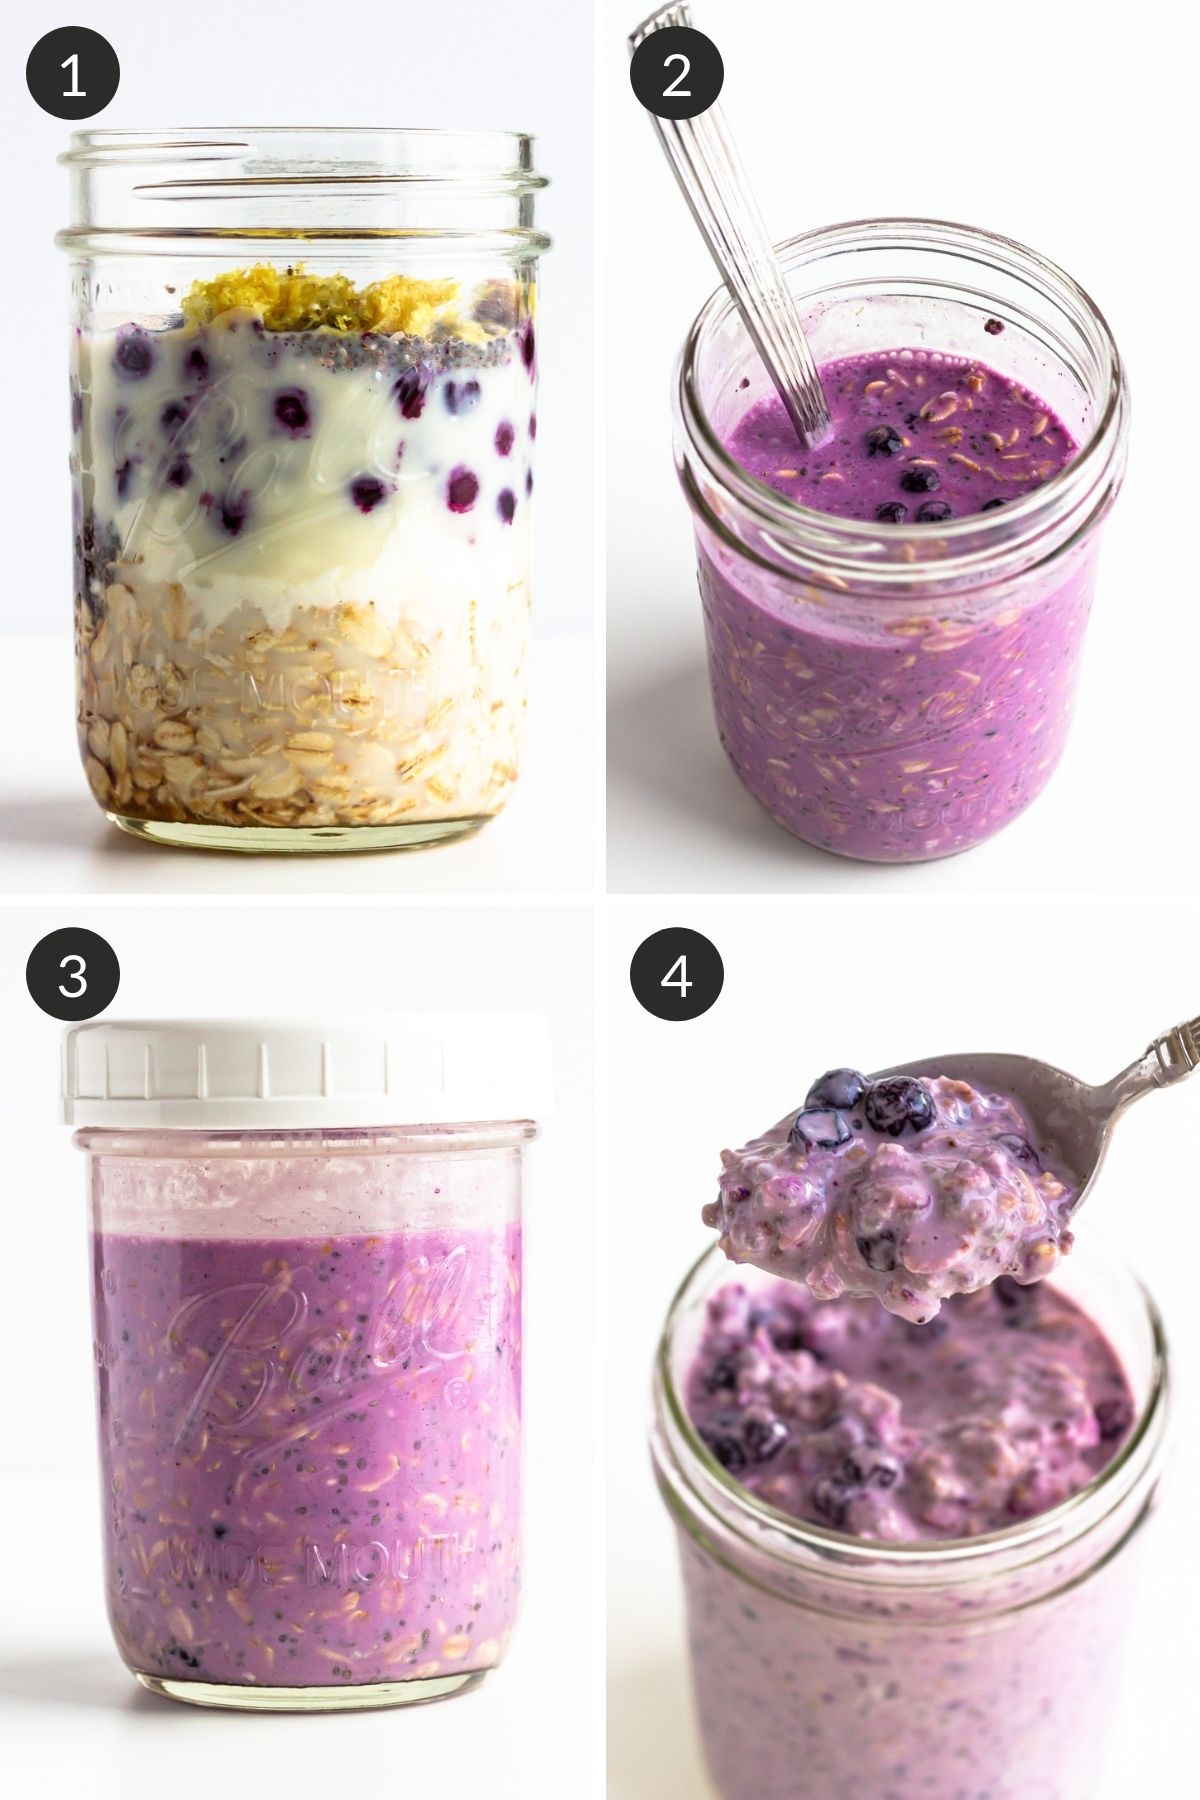 Photo collage showing step by step how to make blueberry overnight oats.